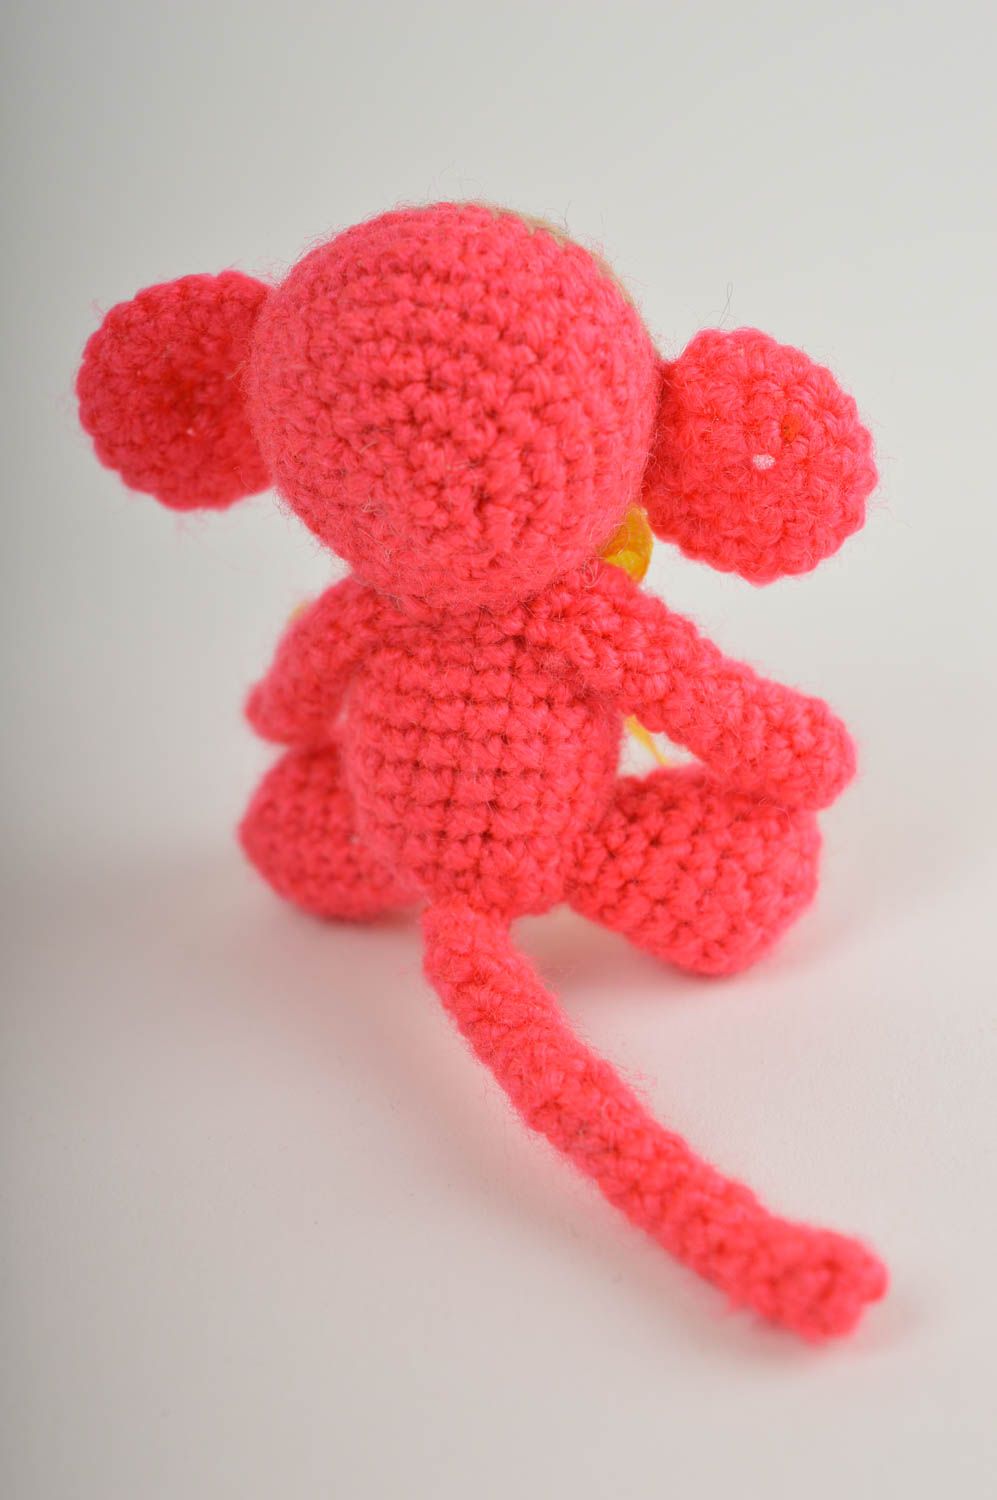 Crocheted handmade toys decorative soft toys for children stuffed toys for baby photo 3